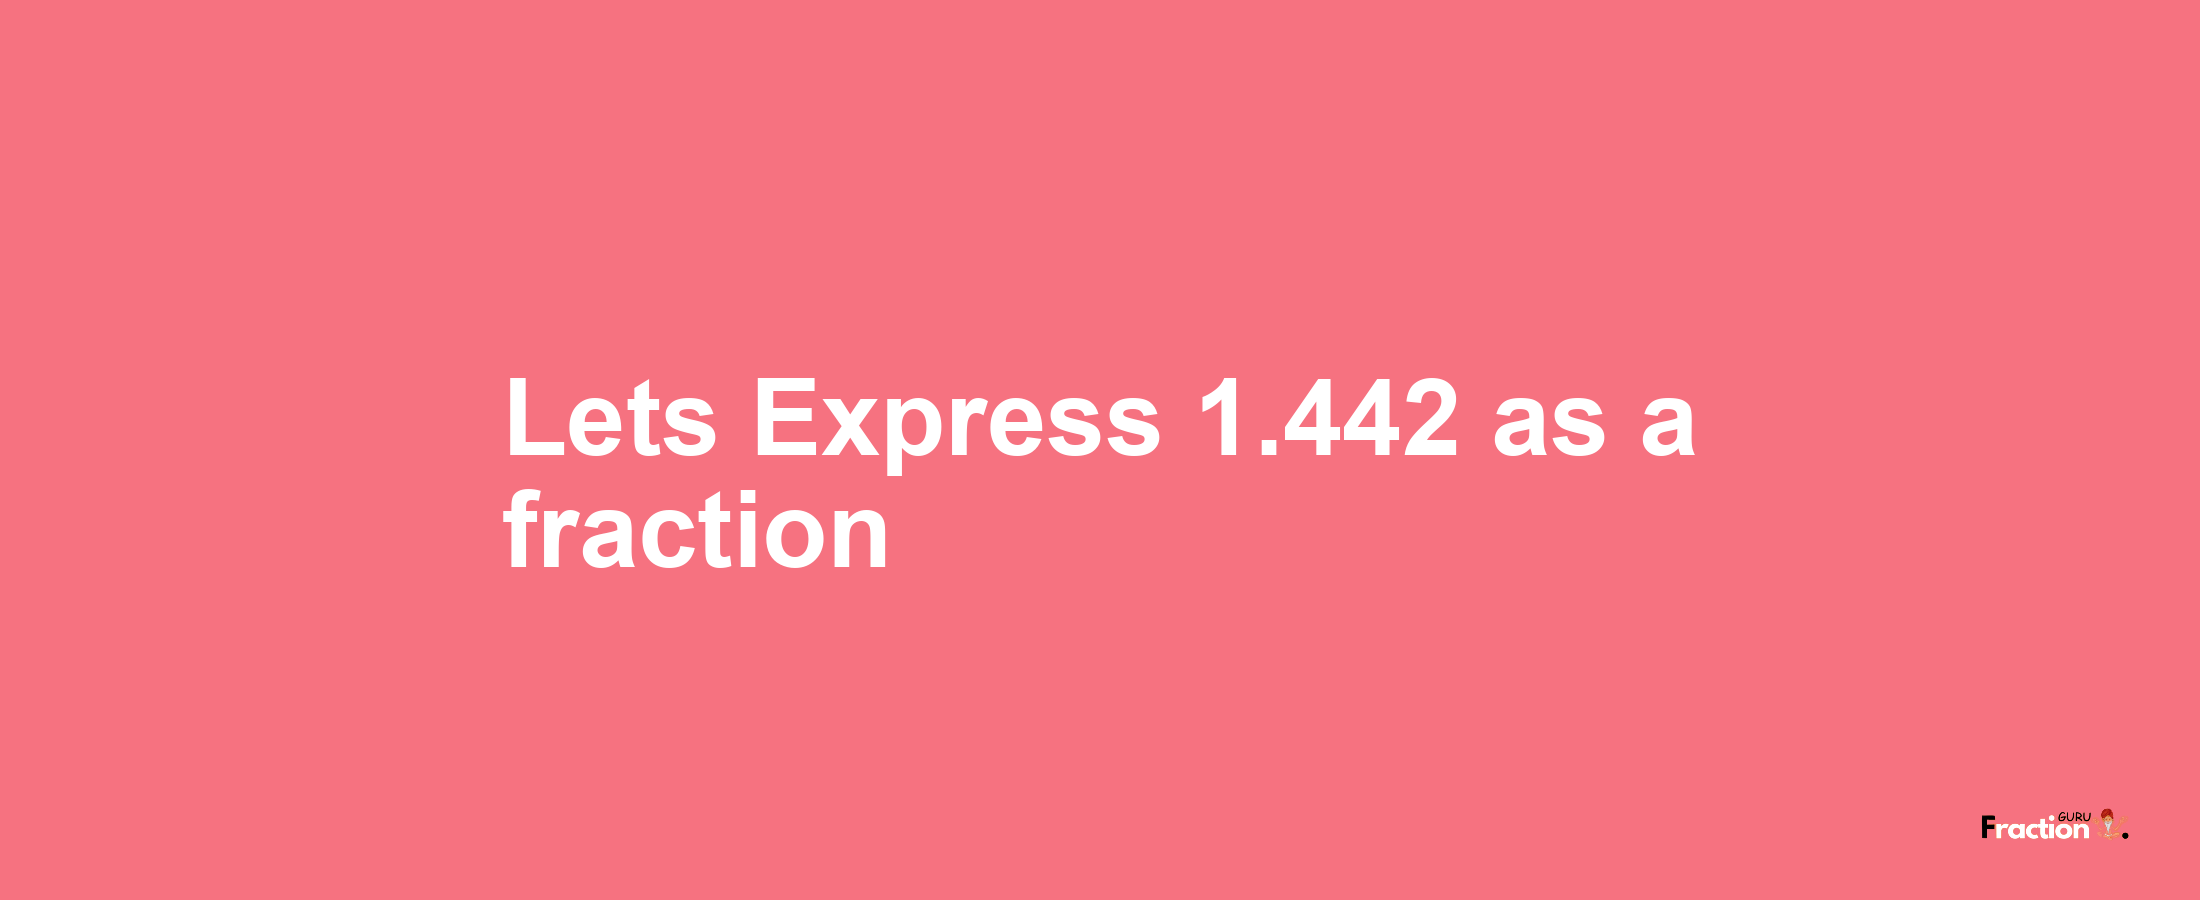 Lets Express 1.442 as afraction